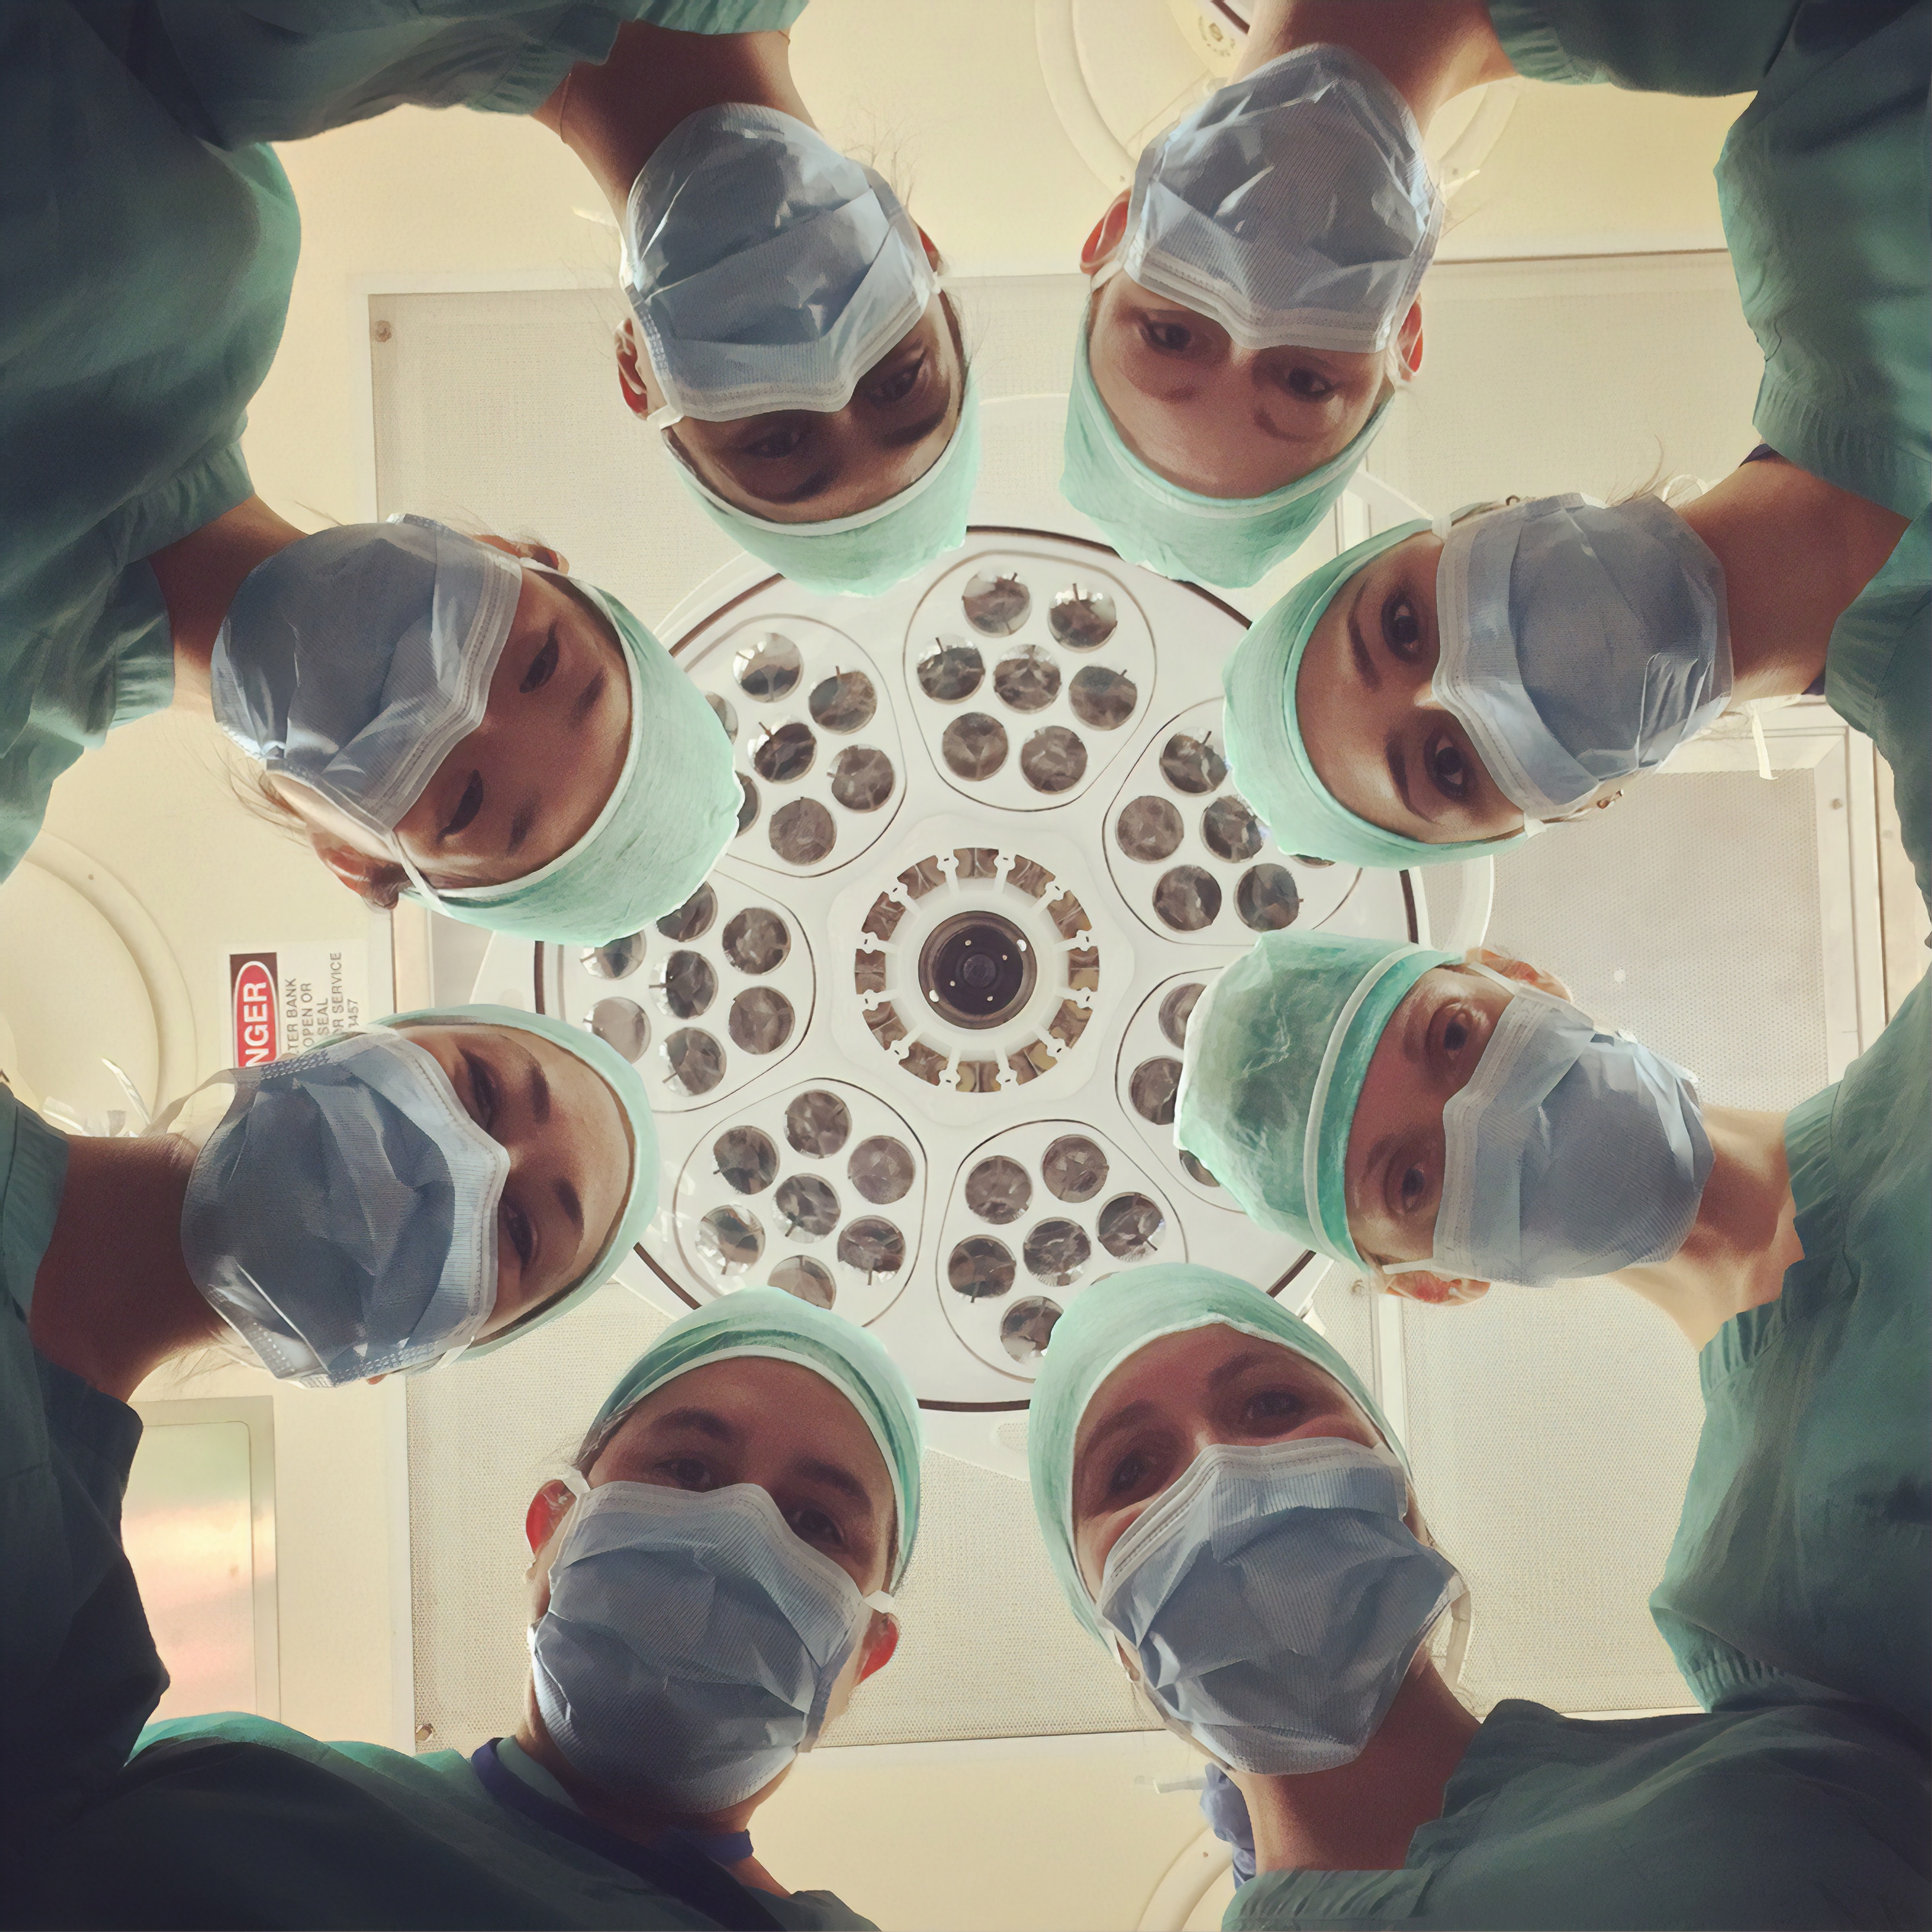 Eight surgeons and health professionals in an Operating Room